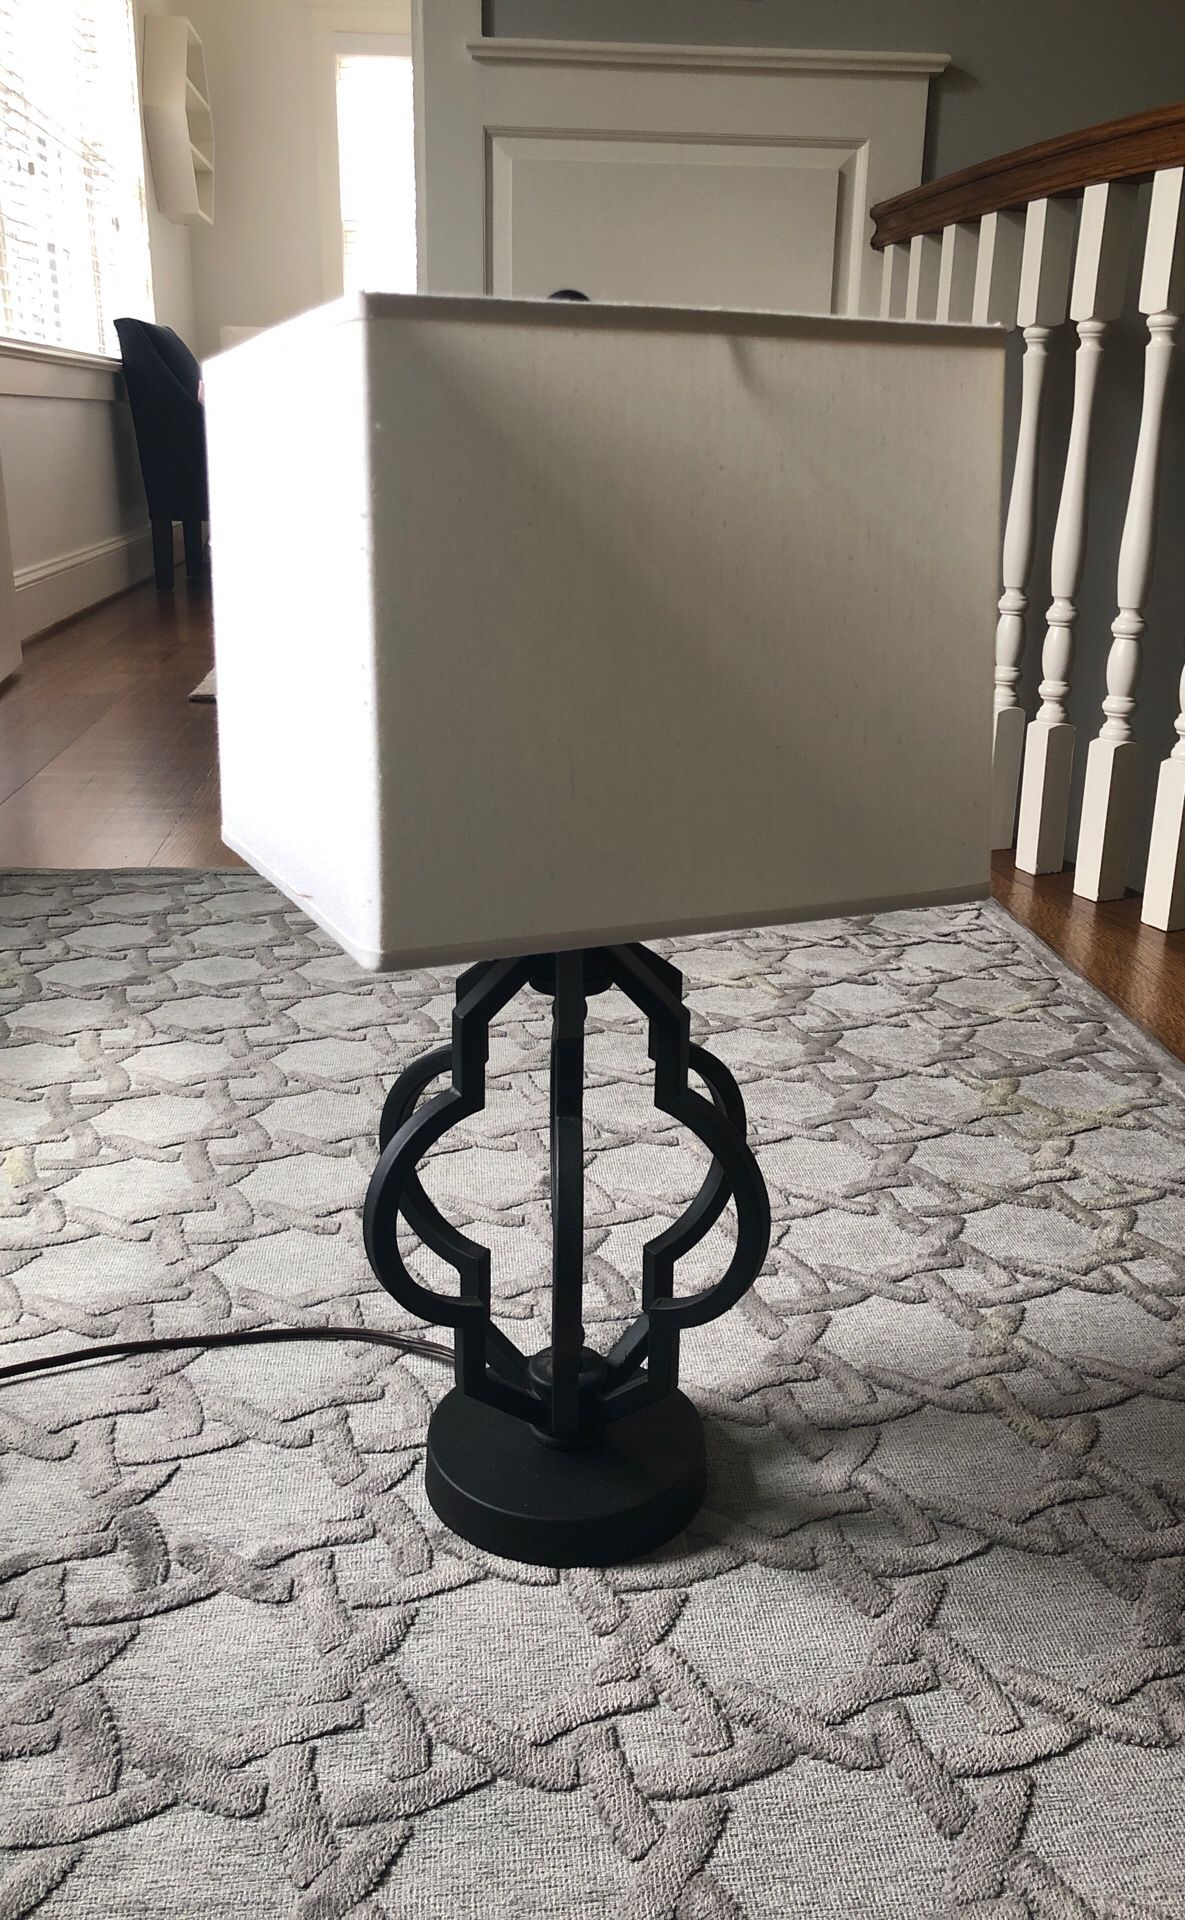 Black lamp with white square shade